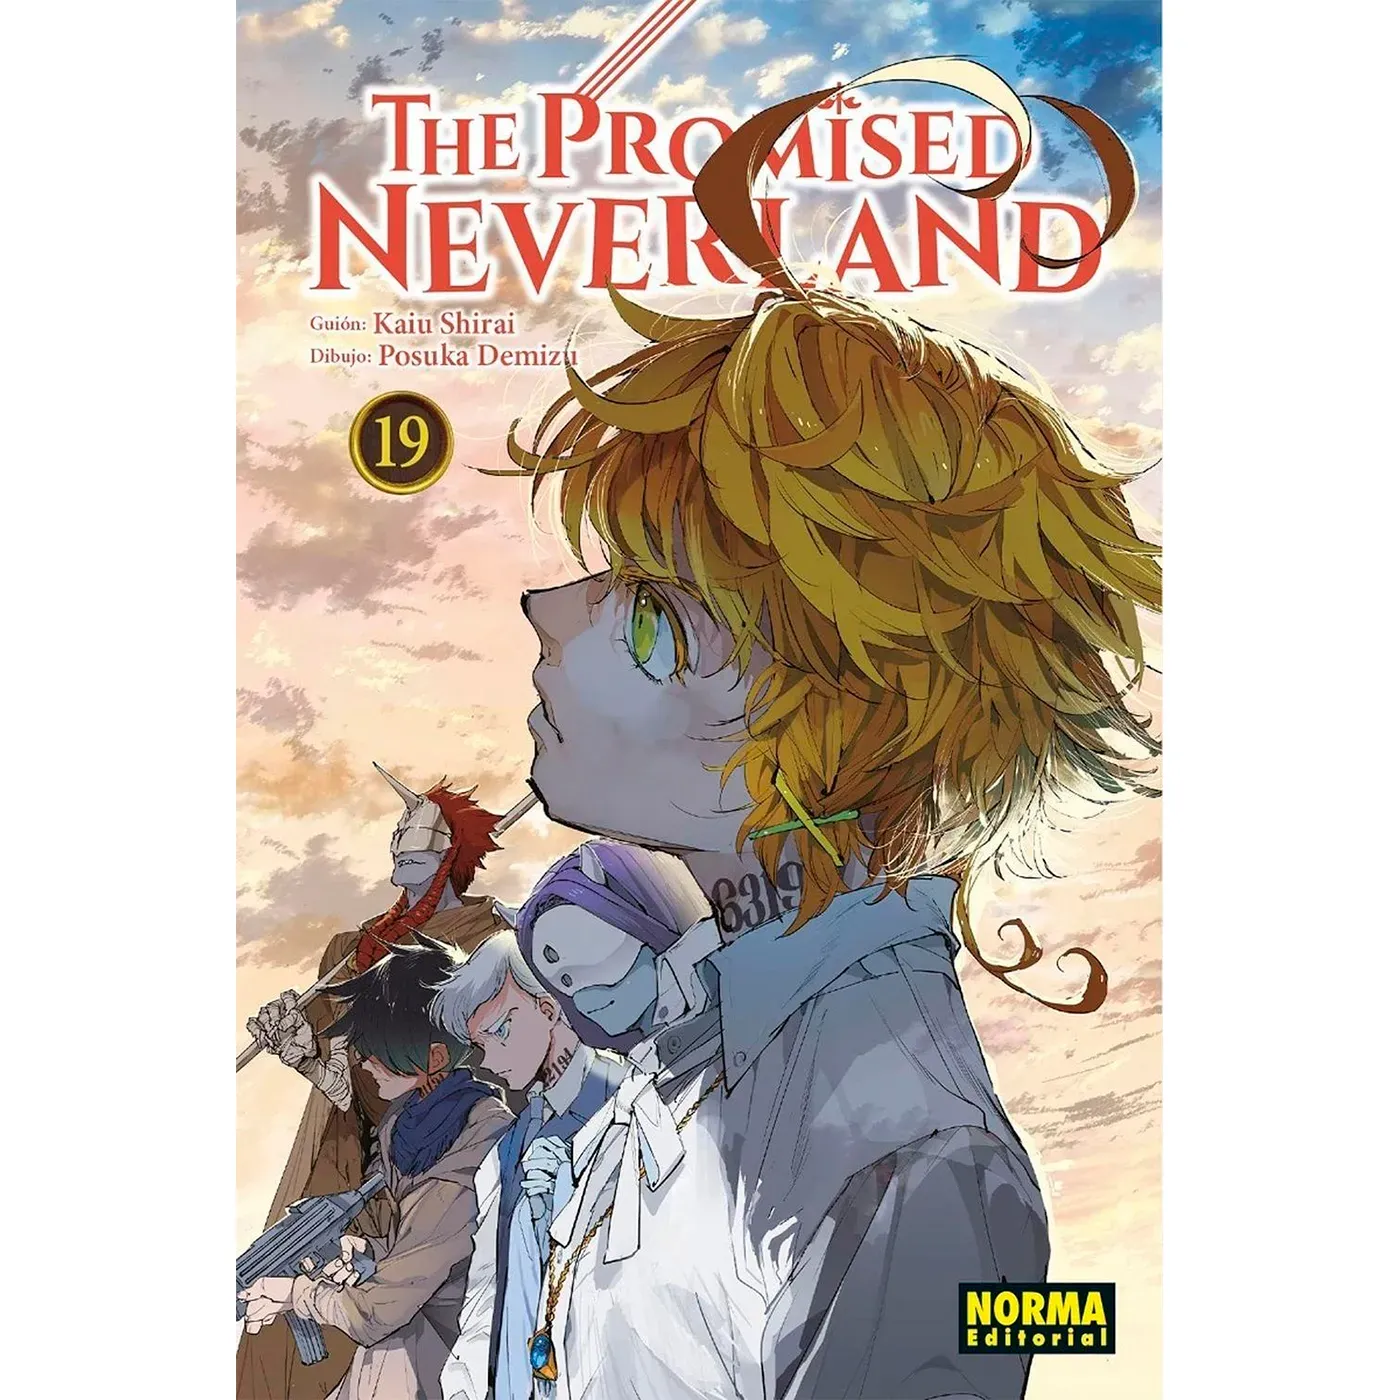 The Promised Neverland No. 19